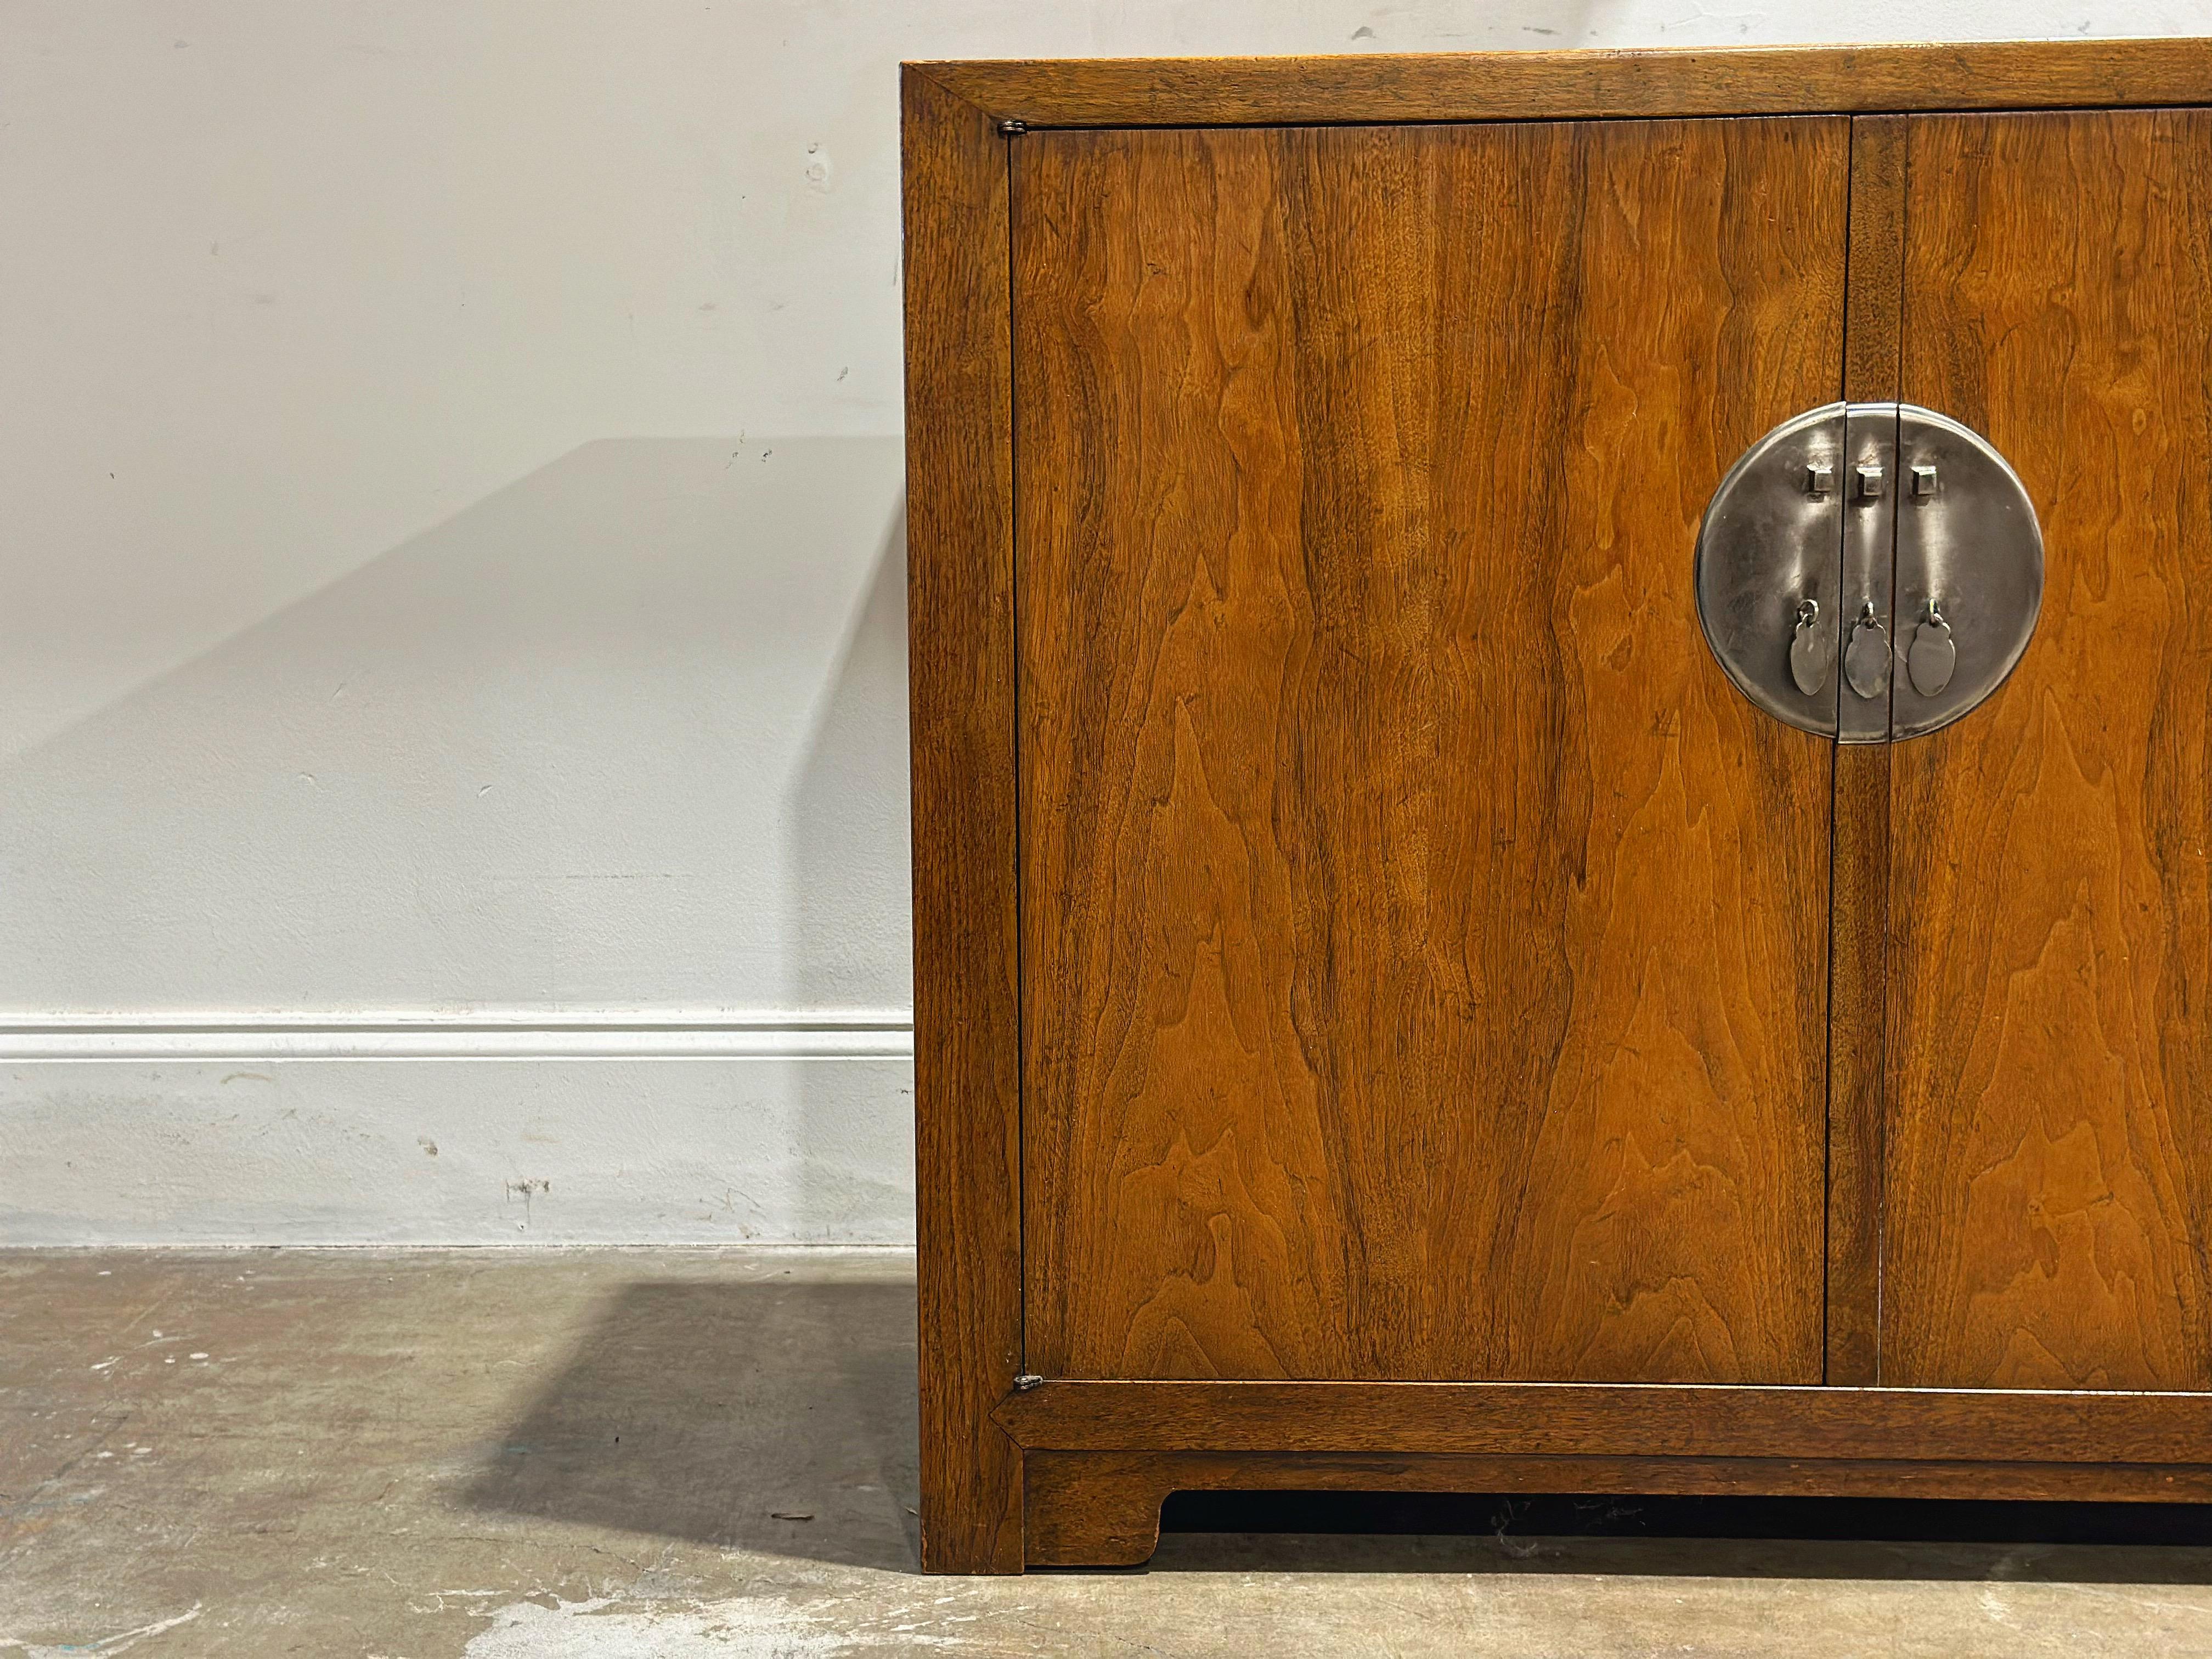 Exquisite credenza sideboard by Michael Taylor for Baker Furniture, circa early 1950s. Part of his iconic 